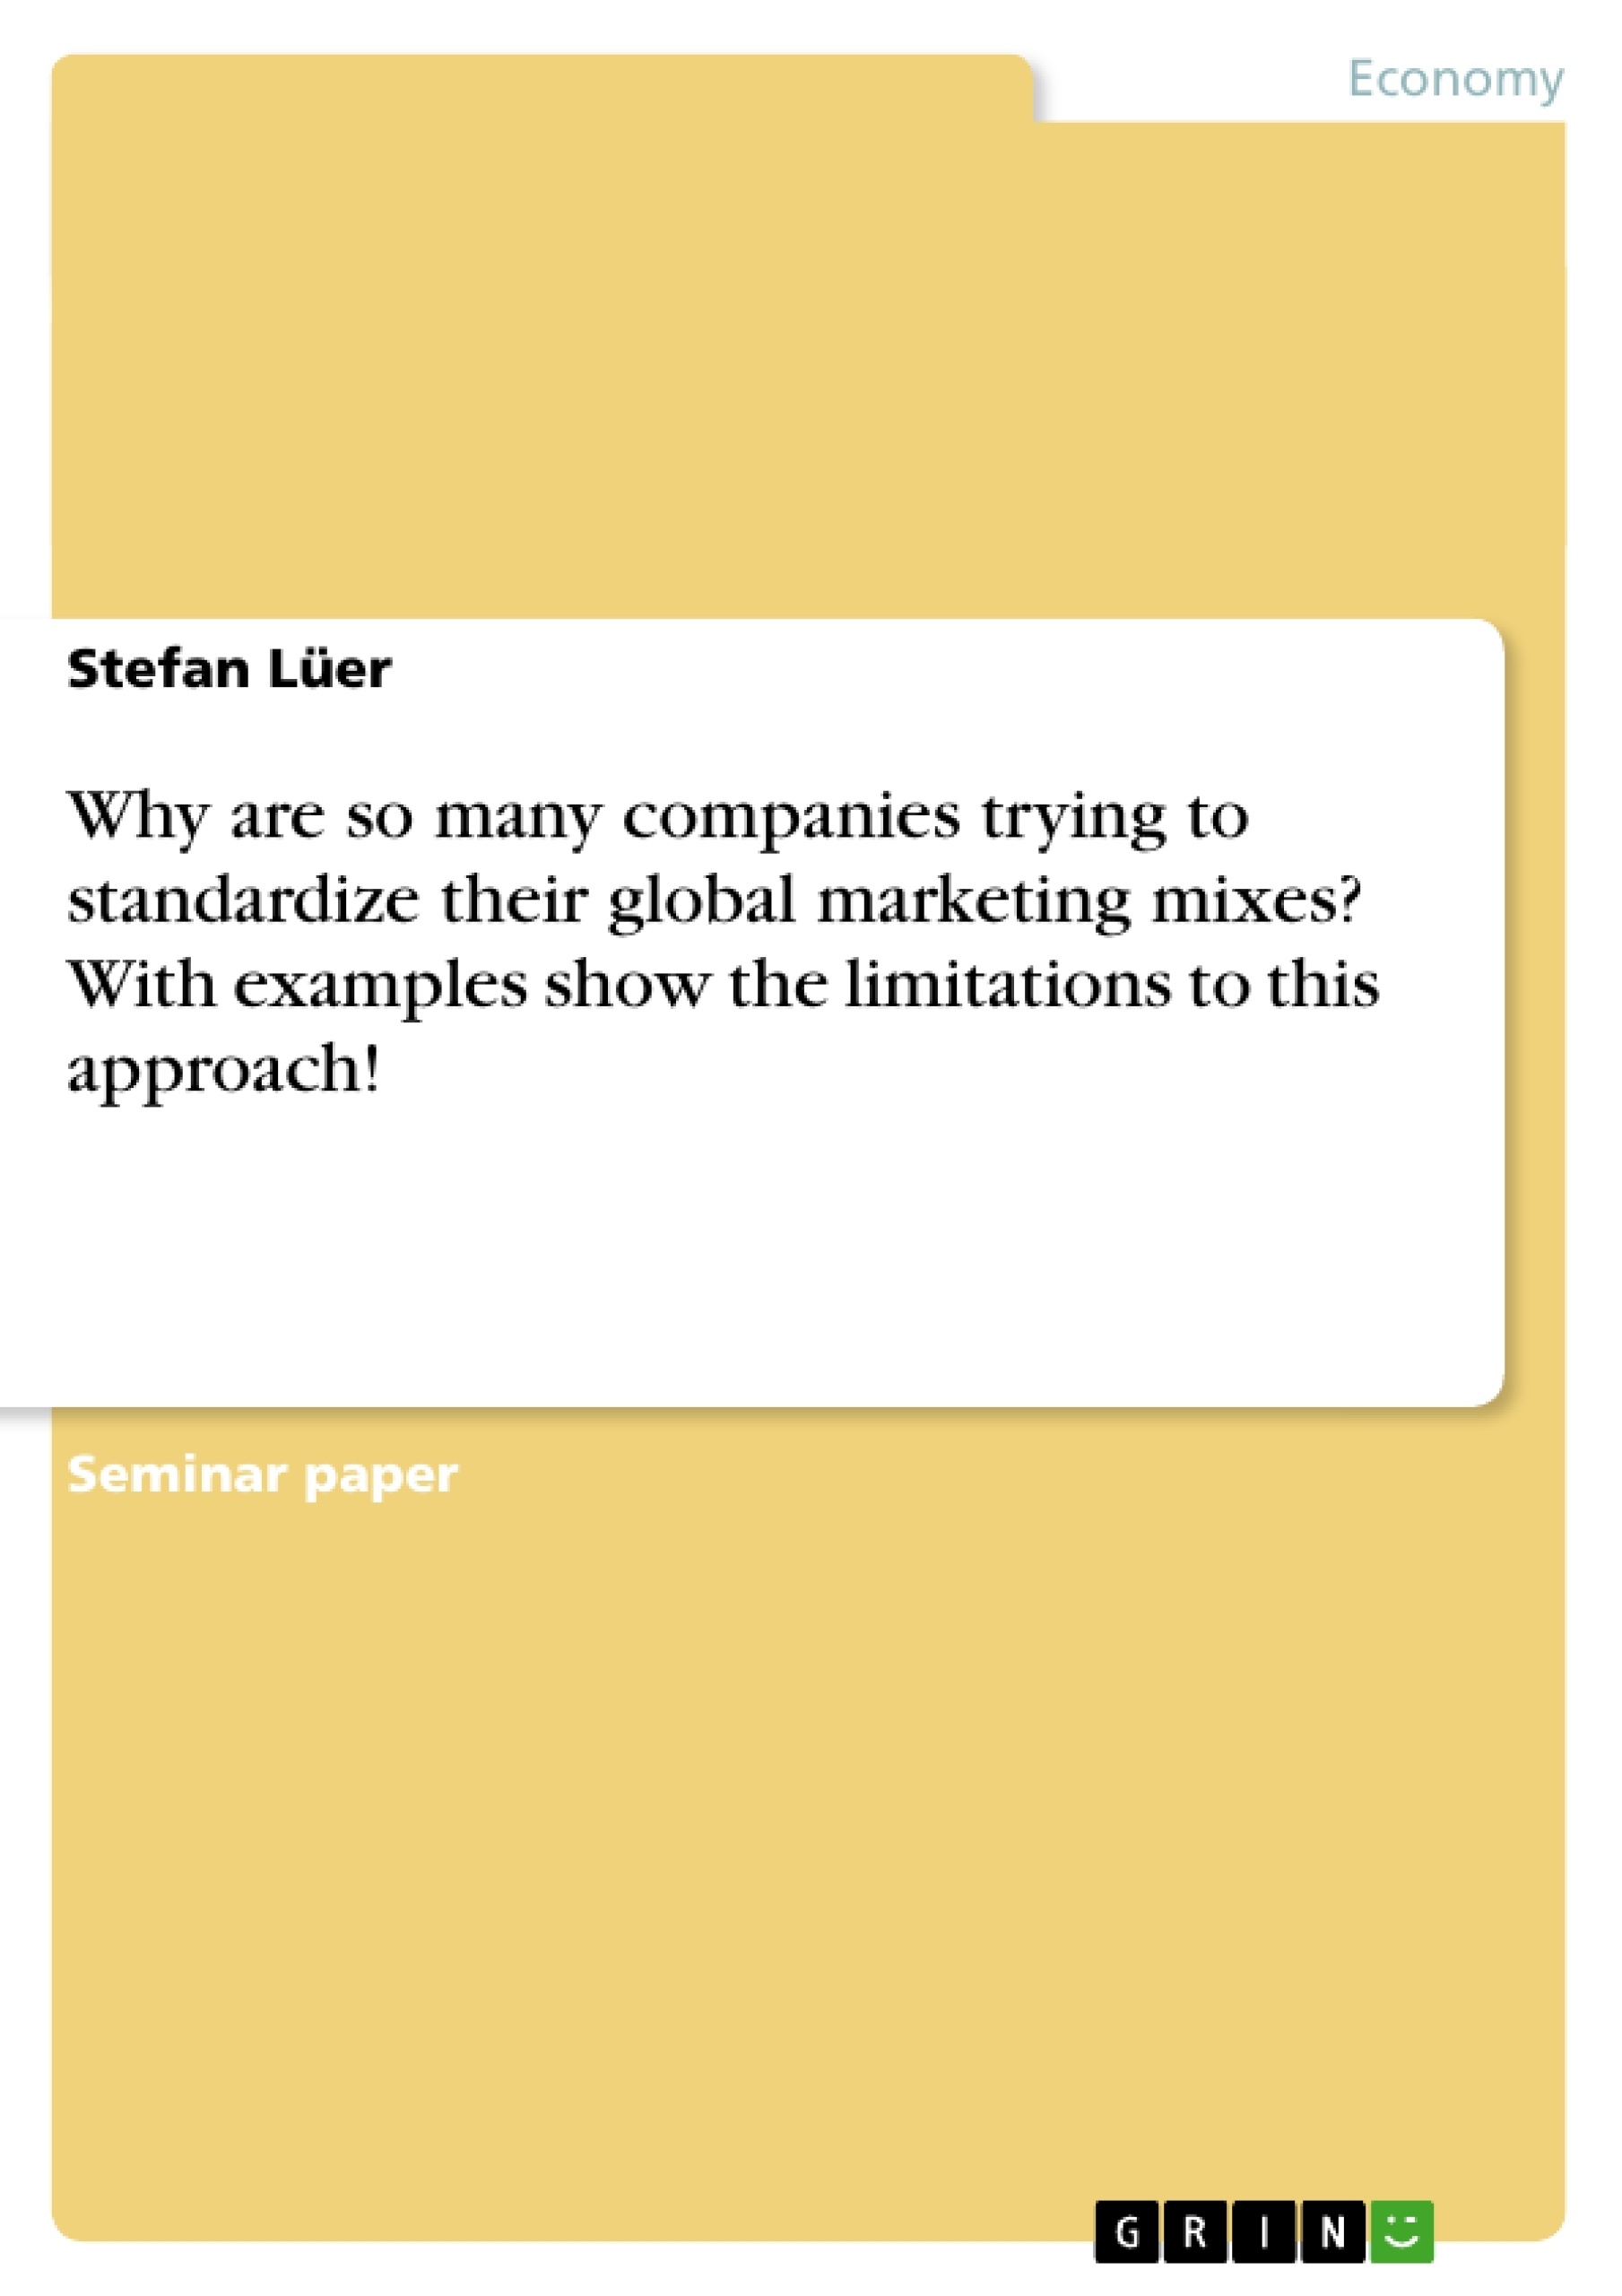 Título: Why are so many companies trying to standardize their global marketing mixes? With examples show the limitations to this approach!